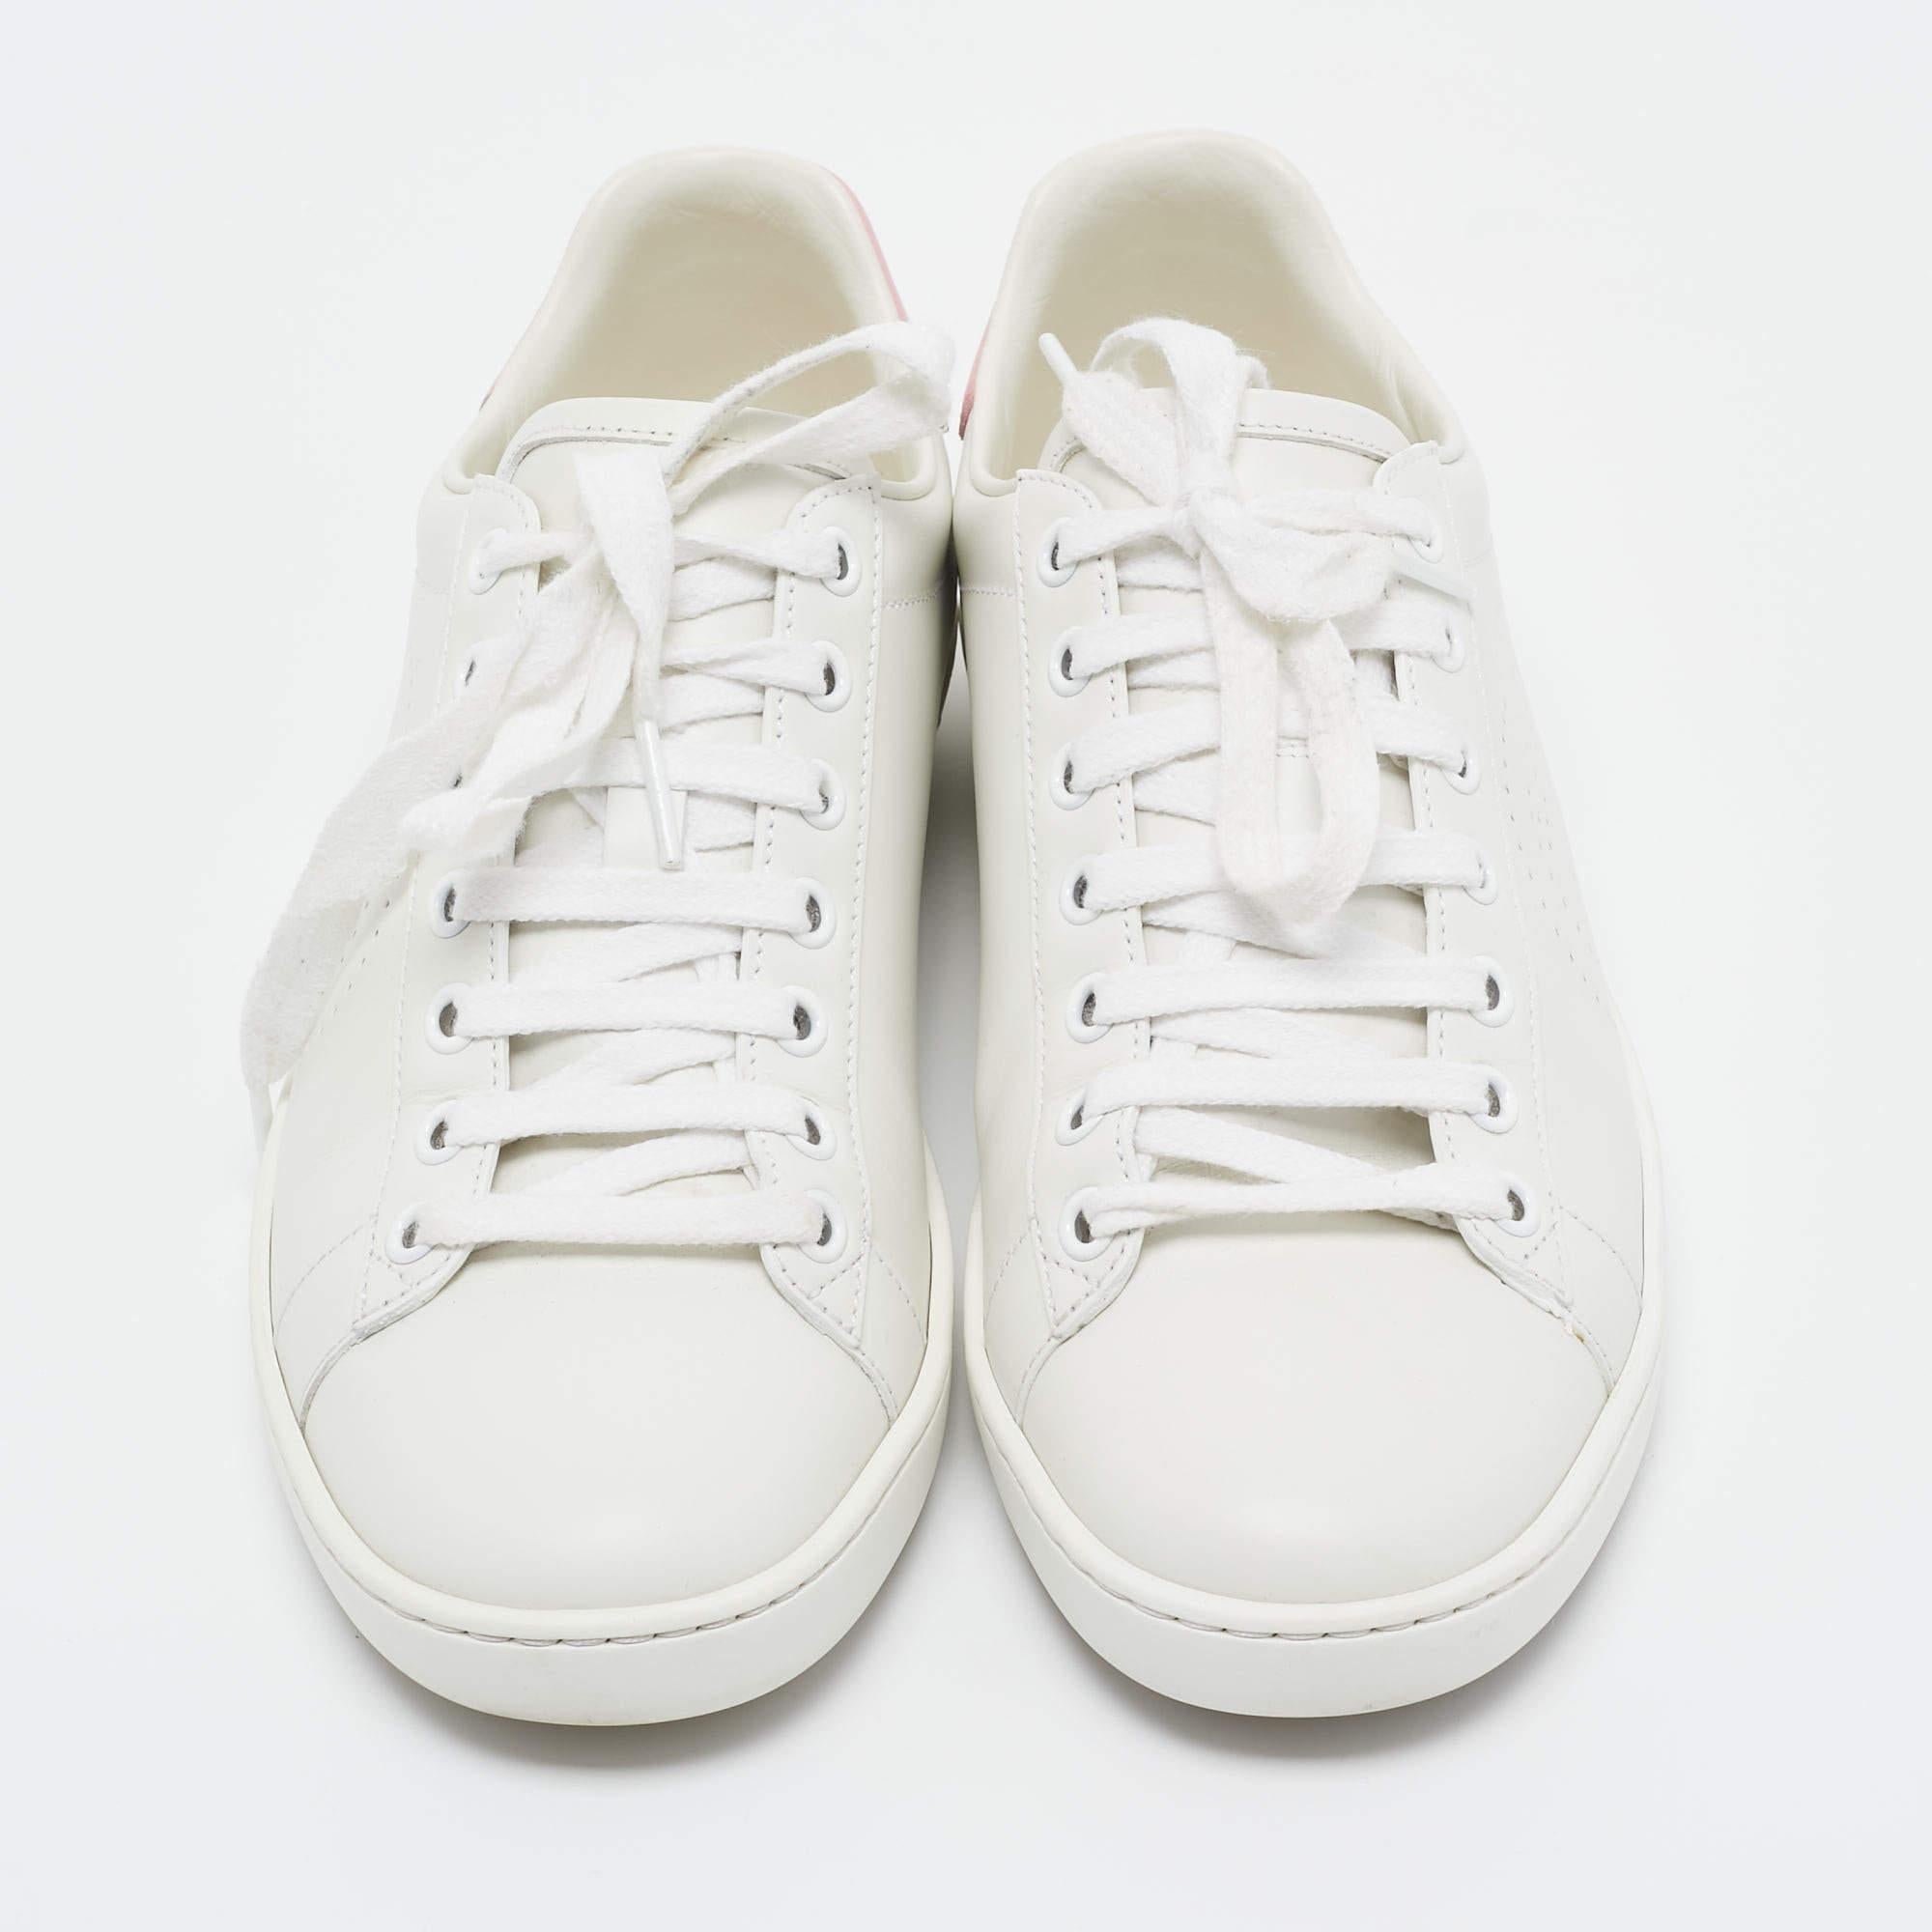 Let this comfortable pair be your first choice when you're out for a long day. These Gucci white Ace sneakers have well-sewn uppers beautifully set on durable soles.

